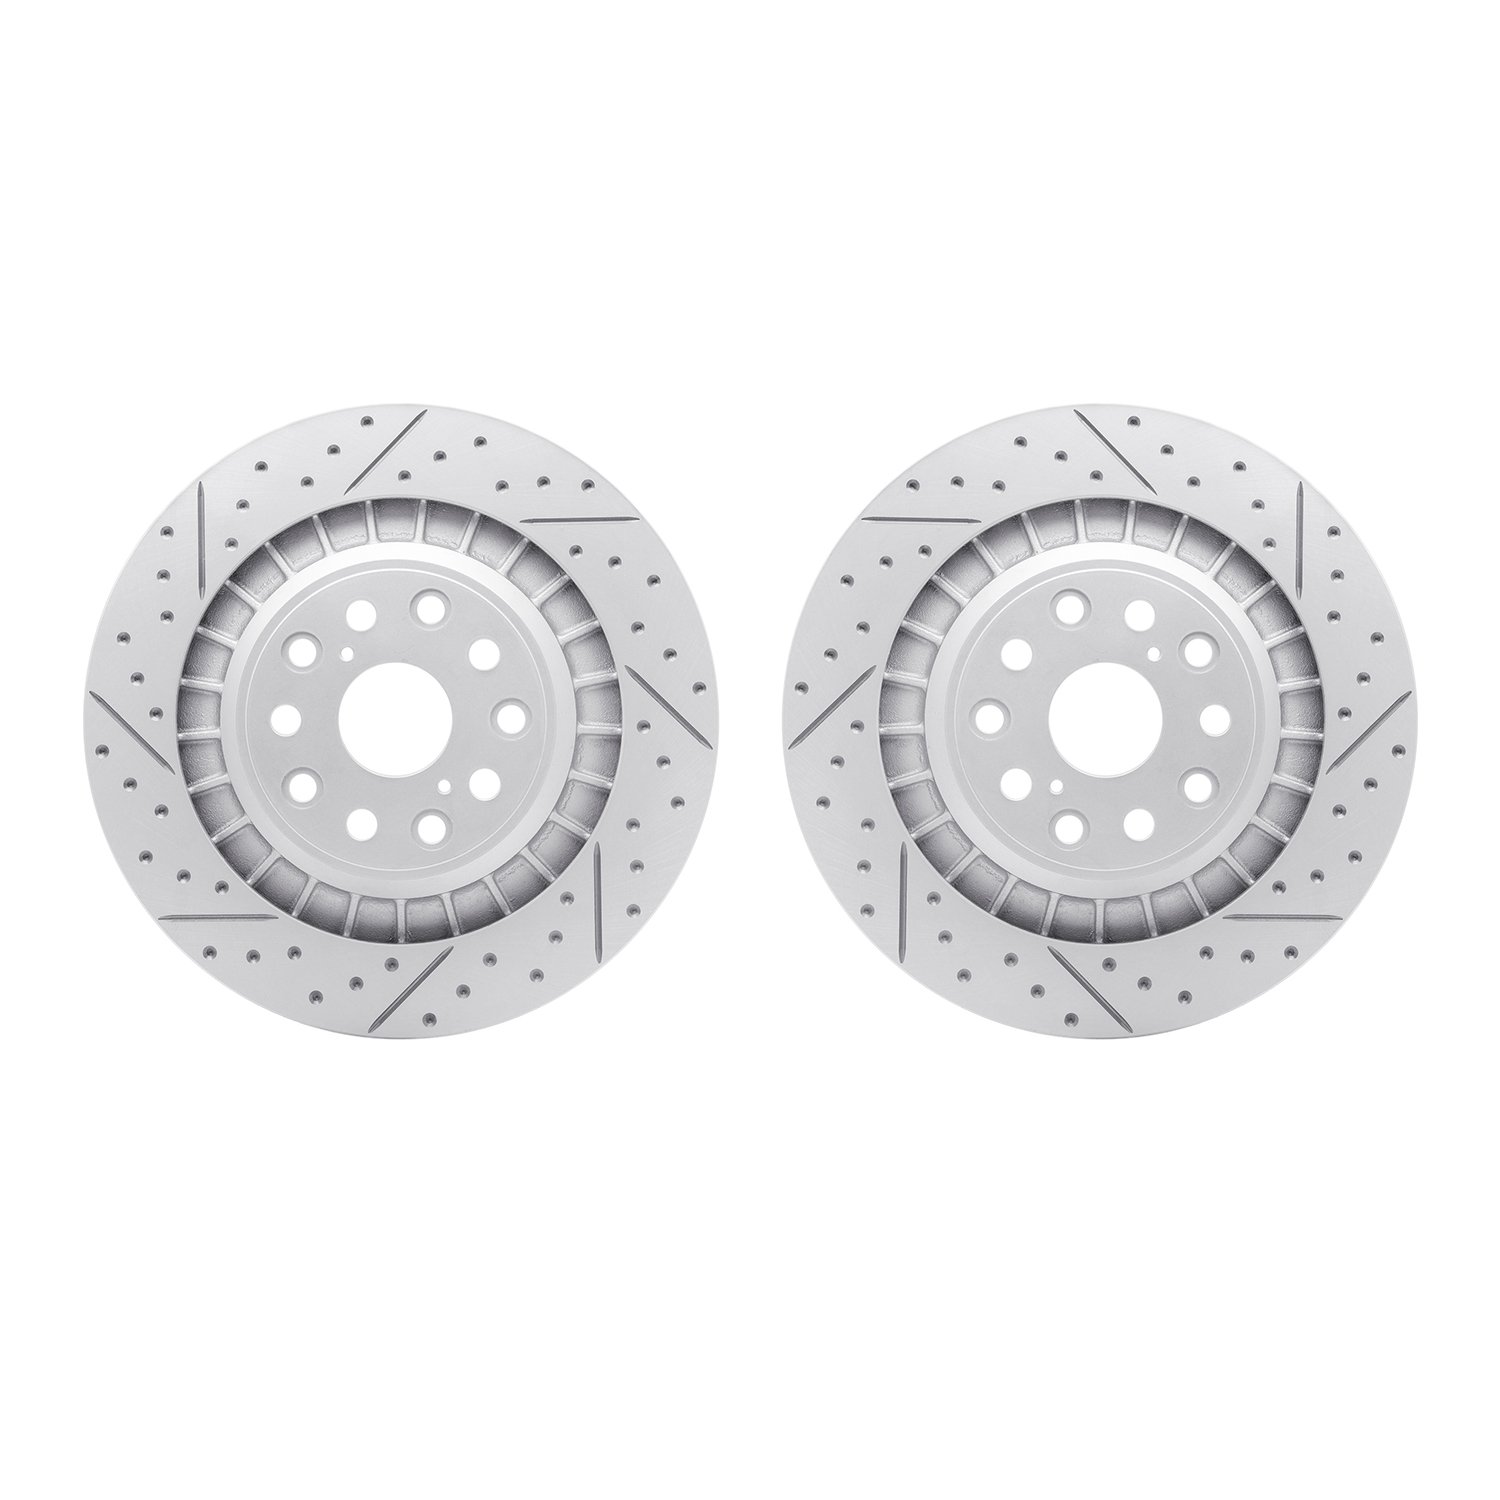 2002-75022 Geoperformance Drilled/Slotted Brake Rotors, Fits Select Lexus/Toyota/Scion, Position: Rear